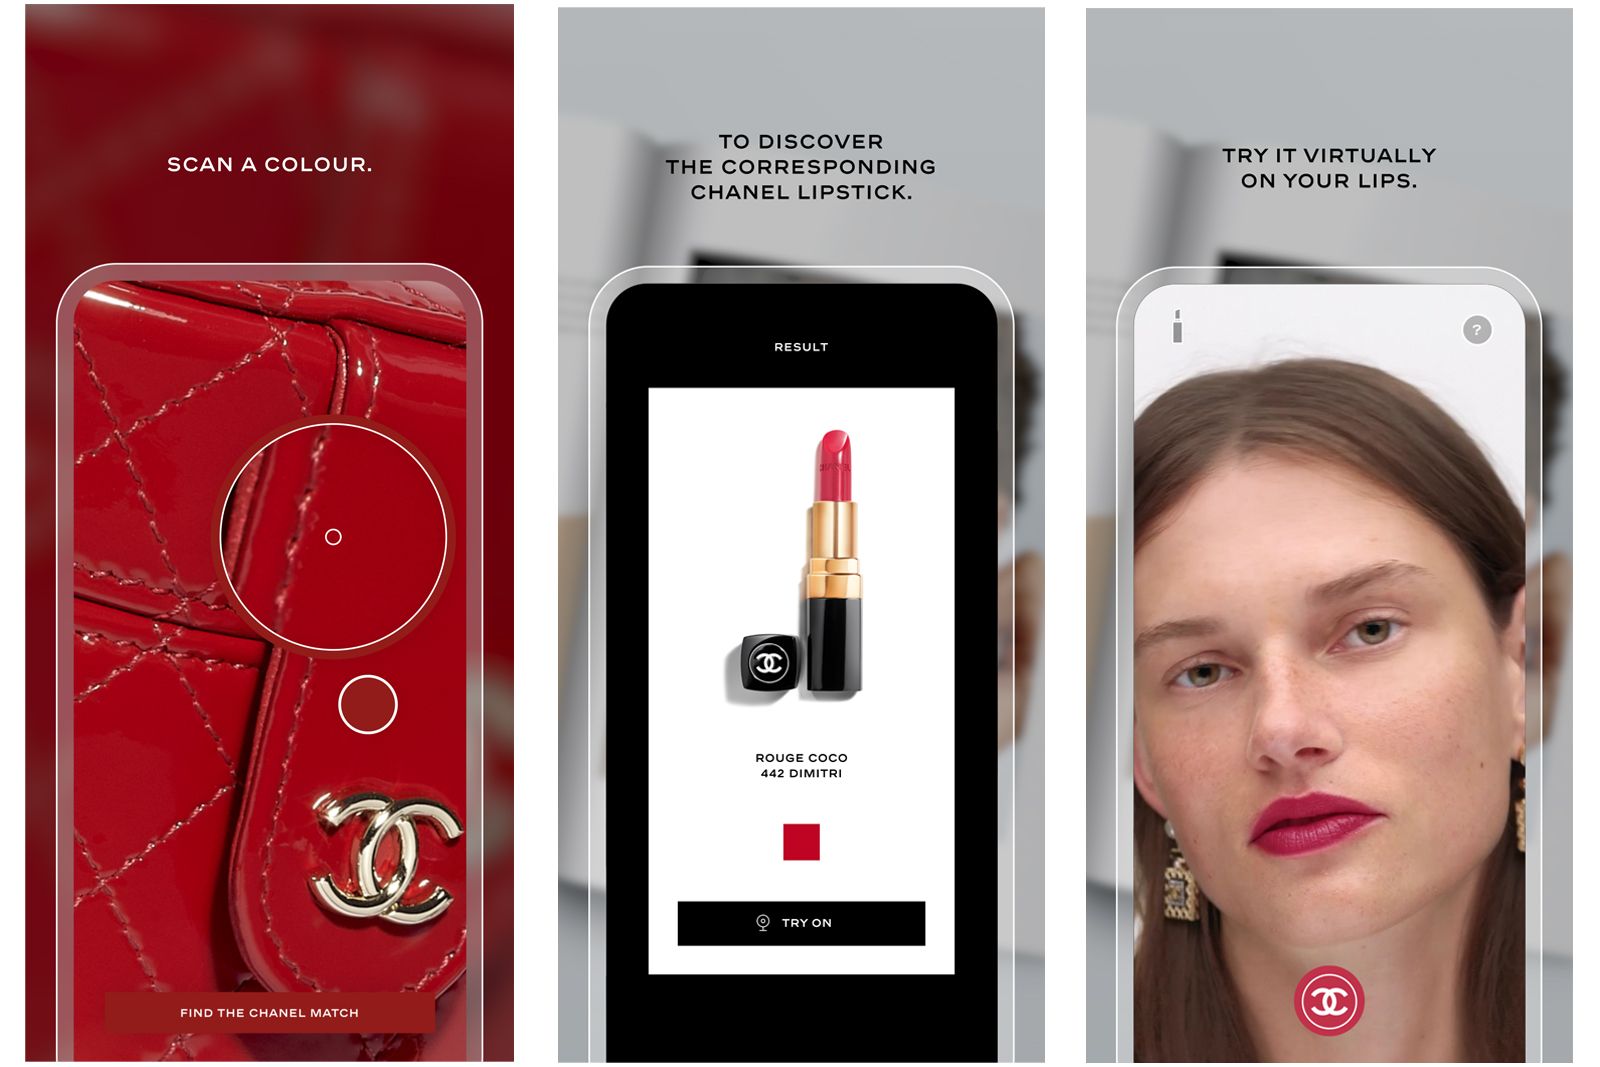 Chanel Lipscanner app will match a lipstick from any image